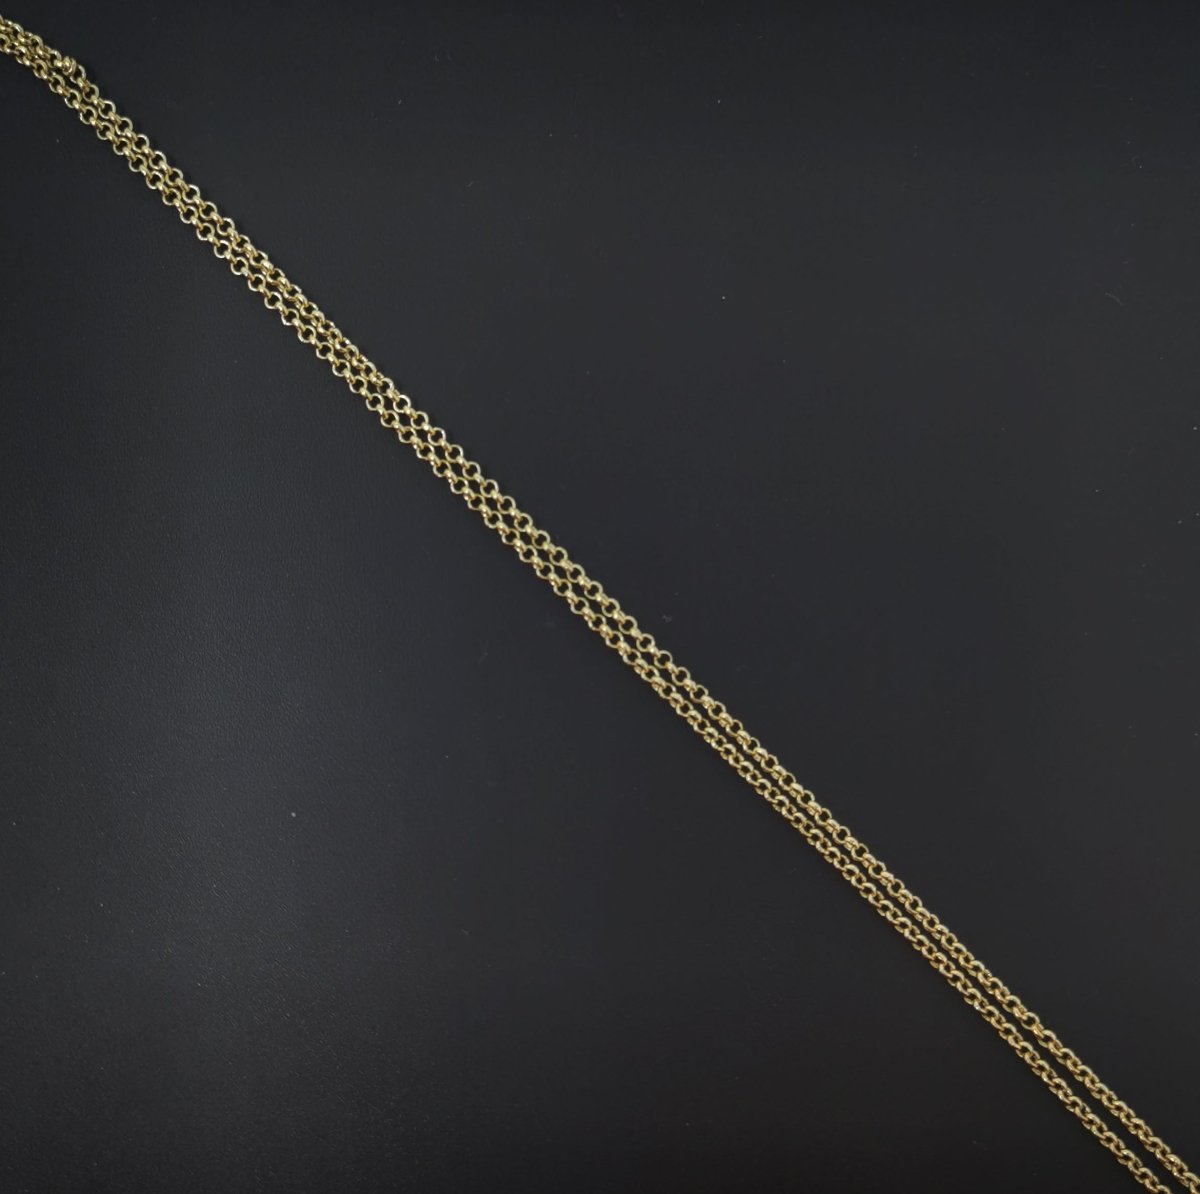 14K Gold Filled Rolo Chain Necklace, 17.7 inch Rolo Finished Chain For Jewelry Making, Dainty 1.5mm Rolo Necklace w/Spring Ring | CN-541 - DLUXCA